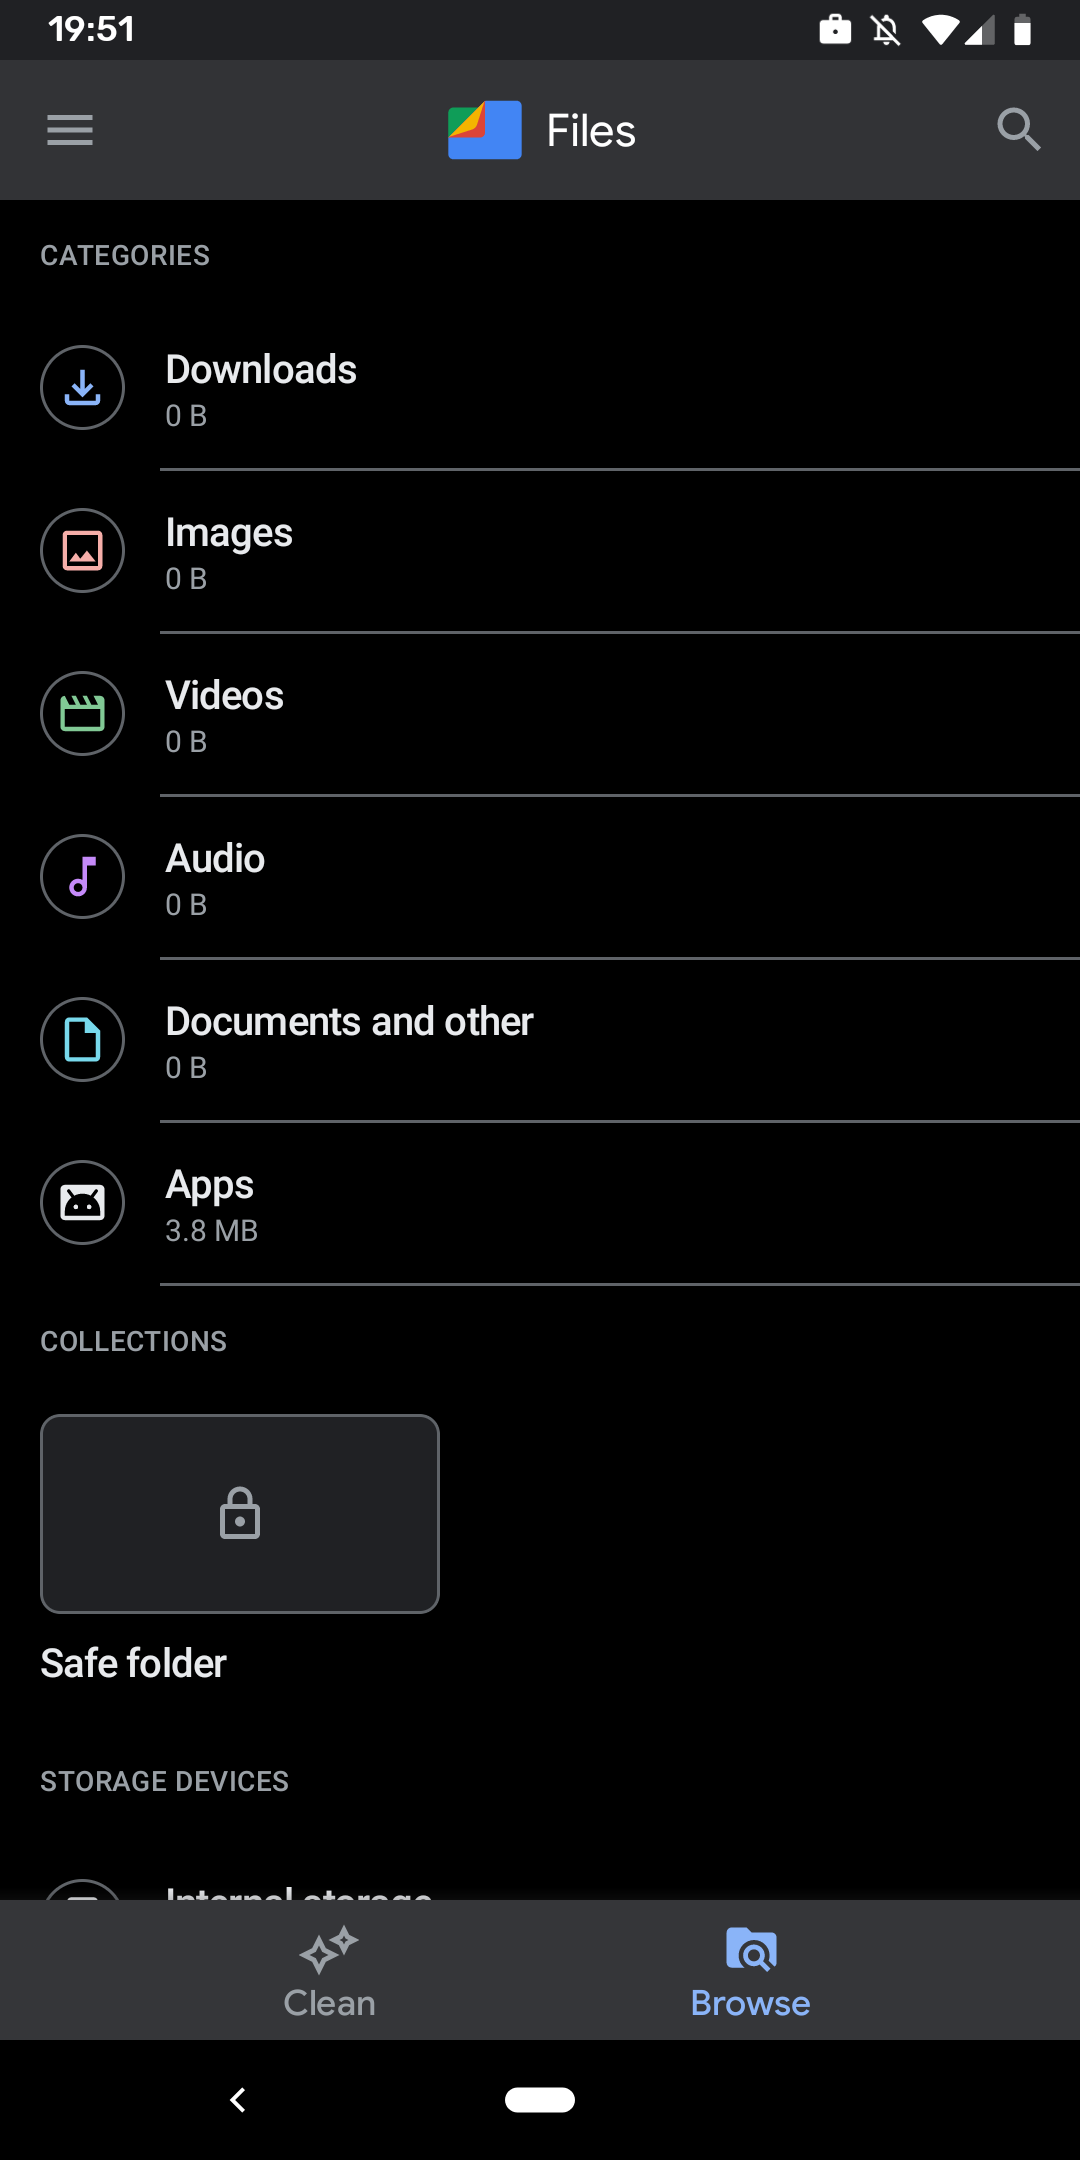 No files accessible in the new Work Profile